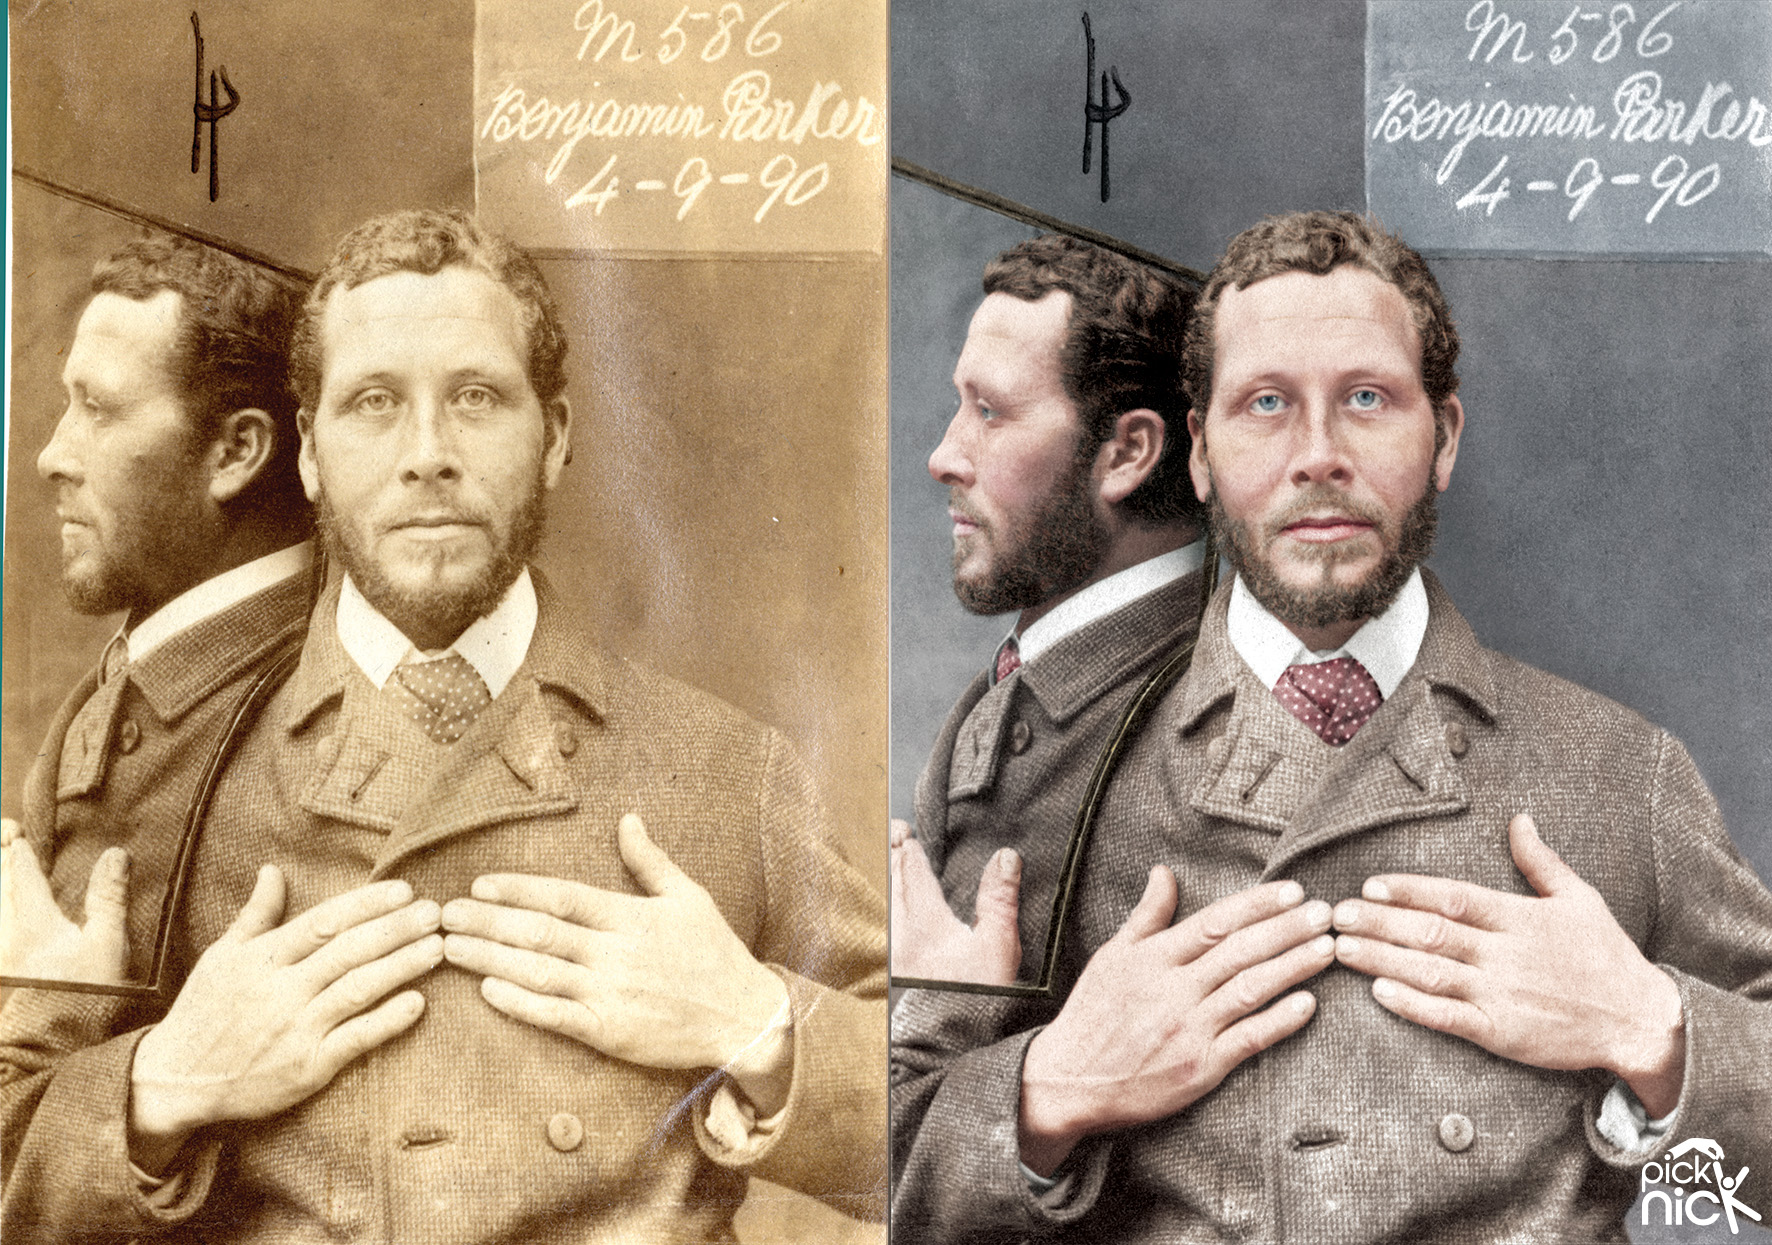 Seaman Benjamin Parker - Colourised prisoner photos showing before and after